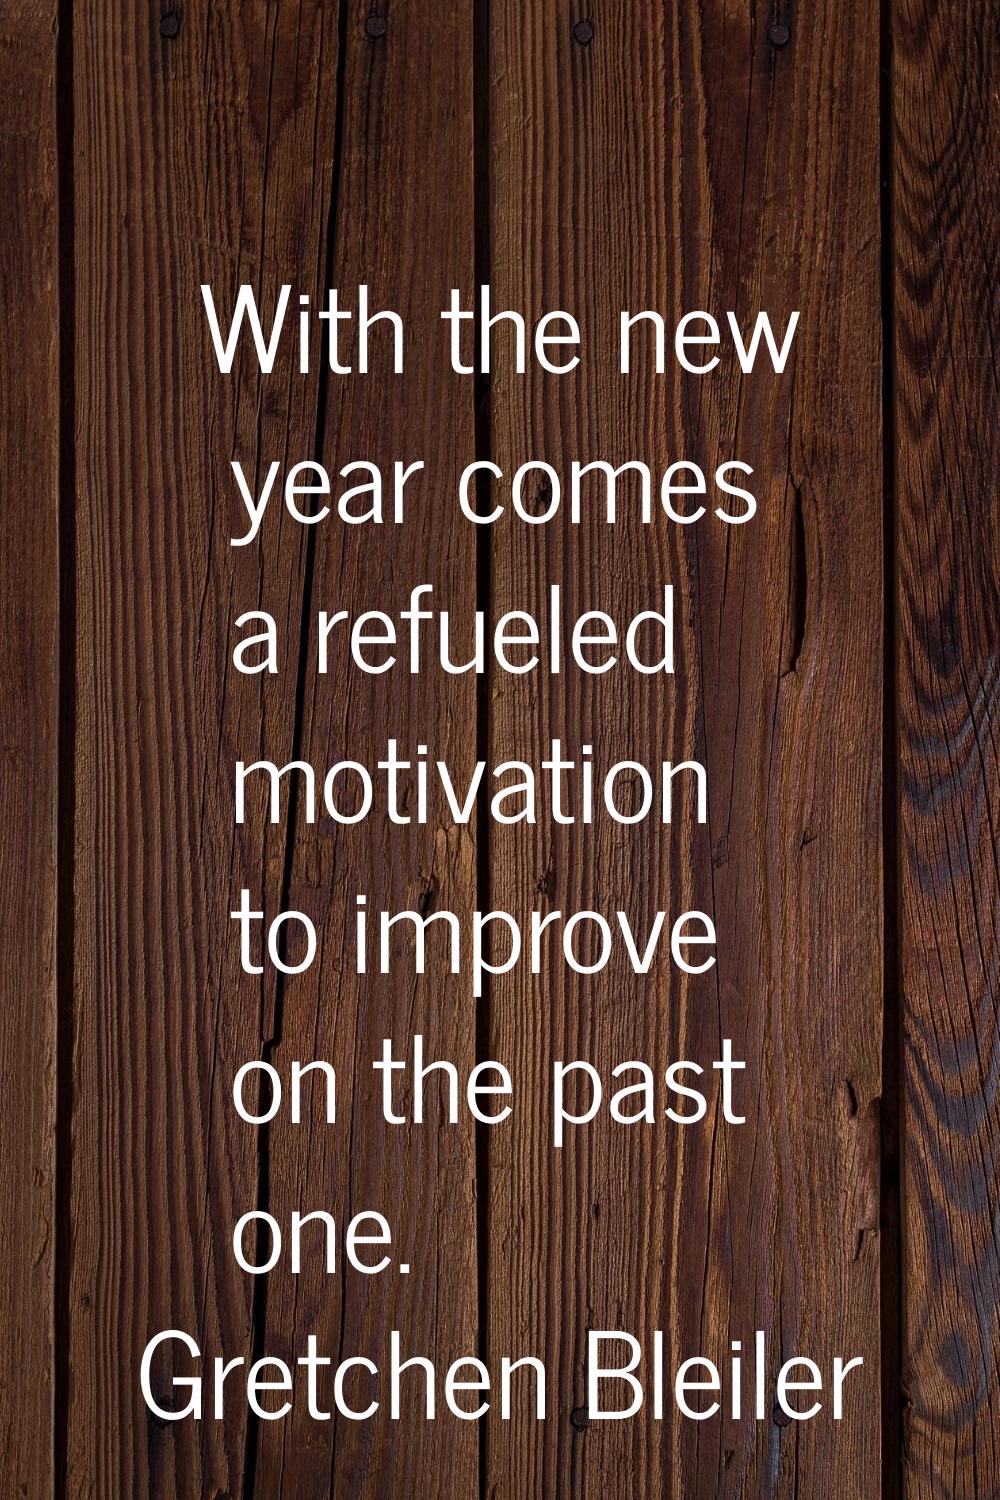 With the new year comes a refueled motivation to improve on the past one.